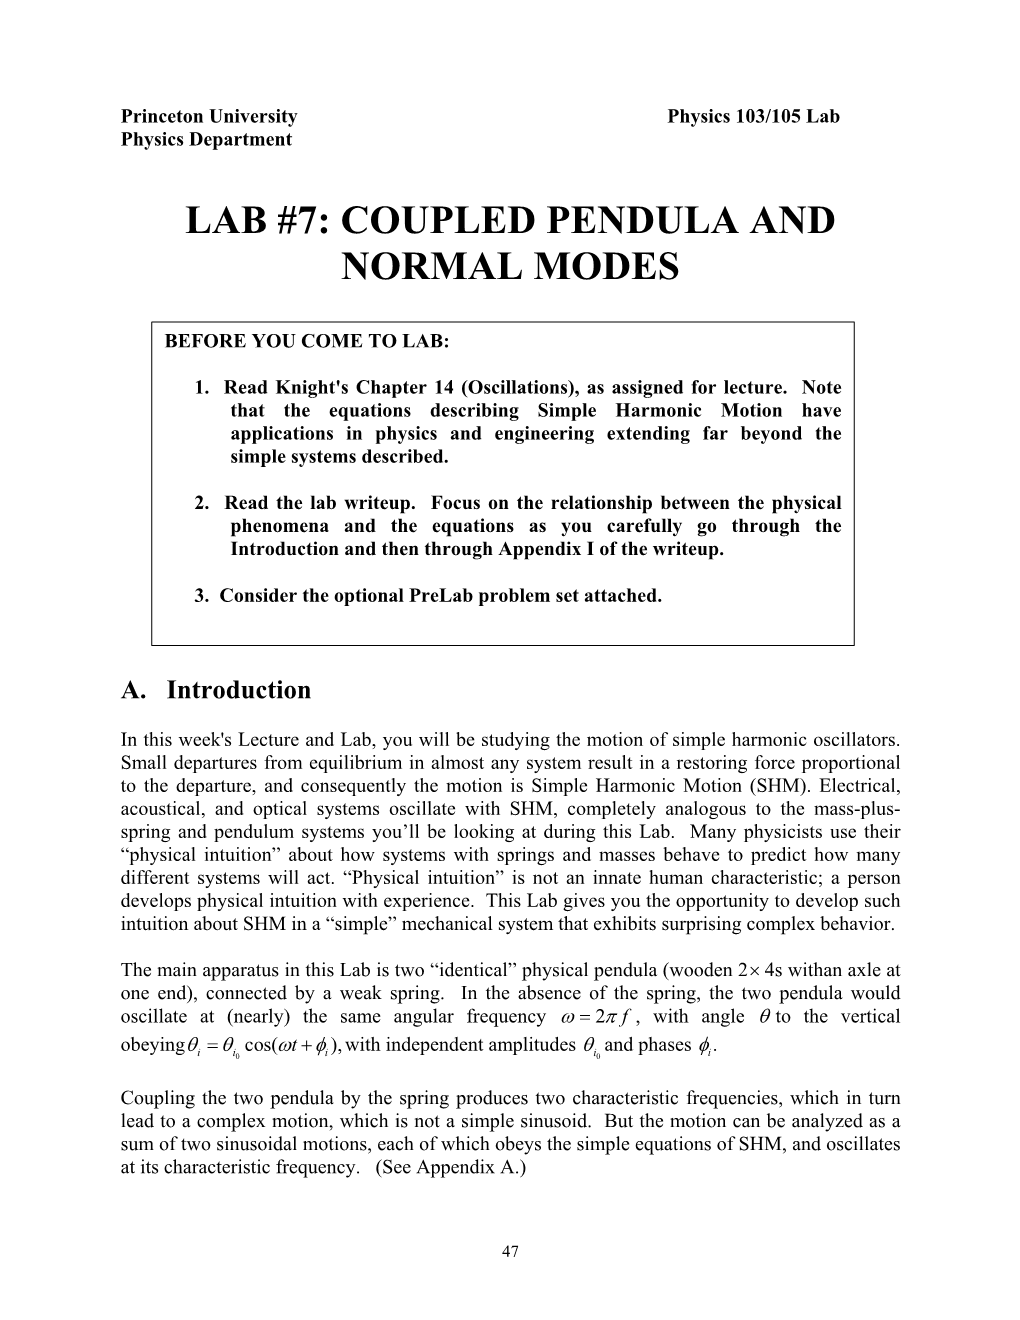 Lab #7: Coupled Pendula and Normal Modes